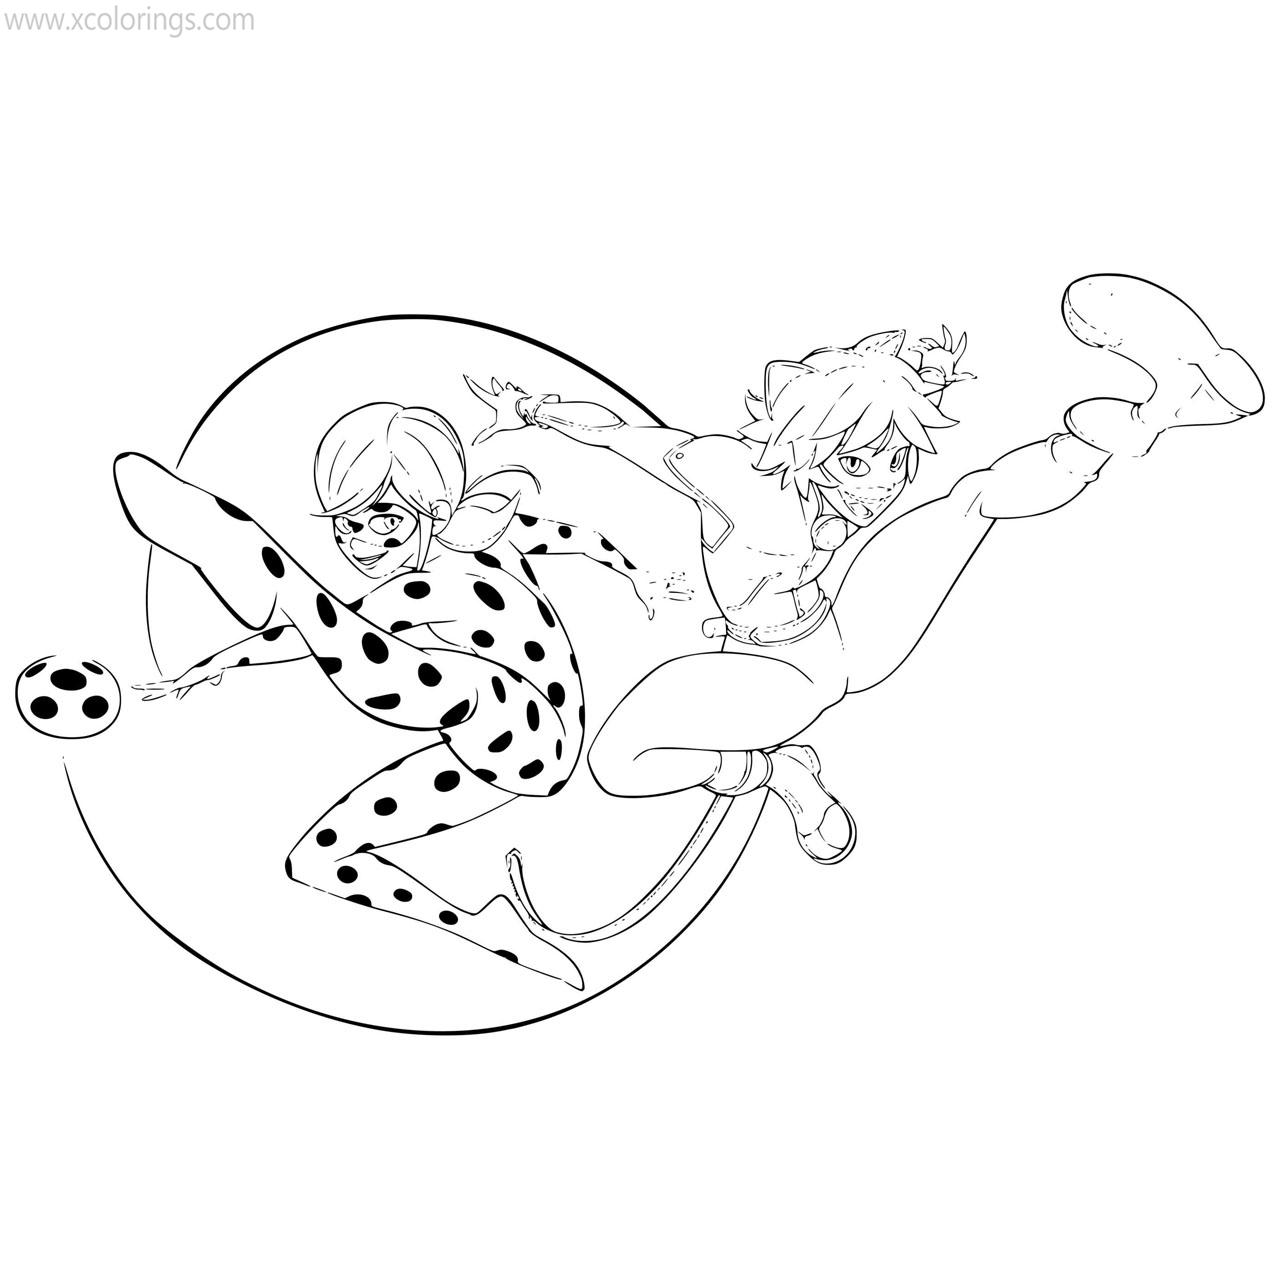 Free Miraculous Ladybug Coloring Pages with Cat Noir printable